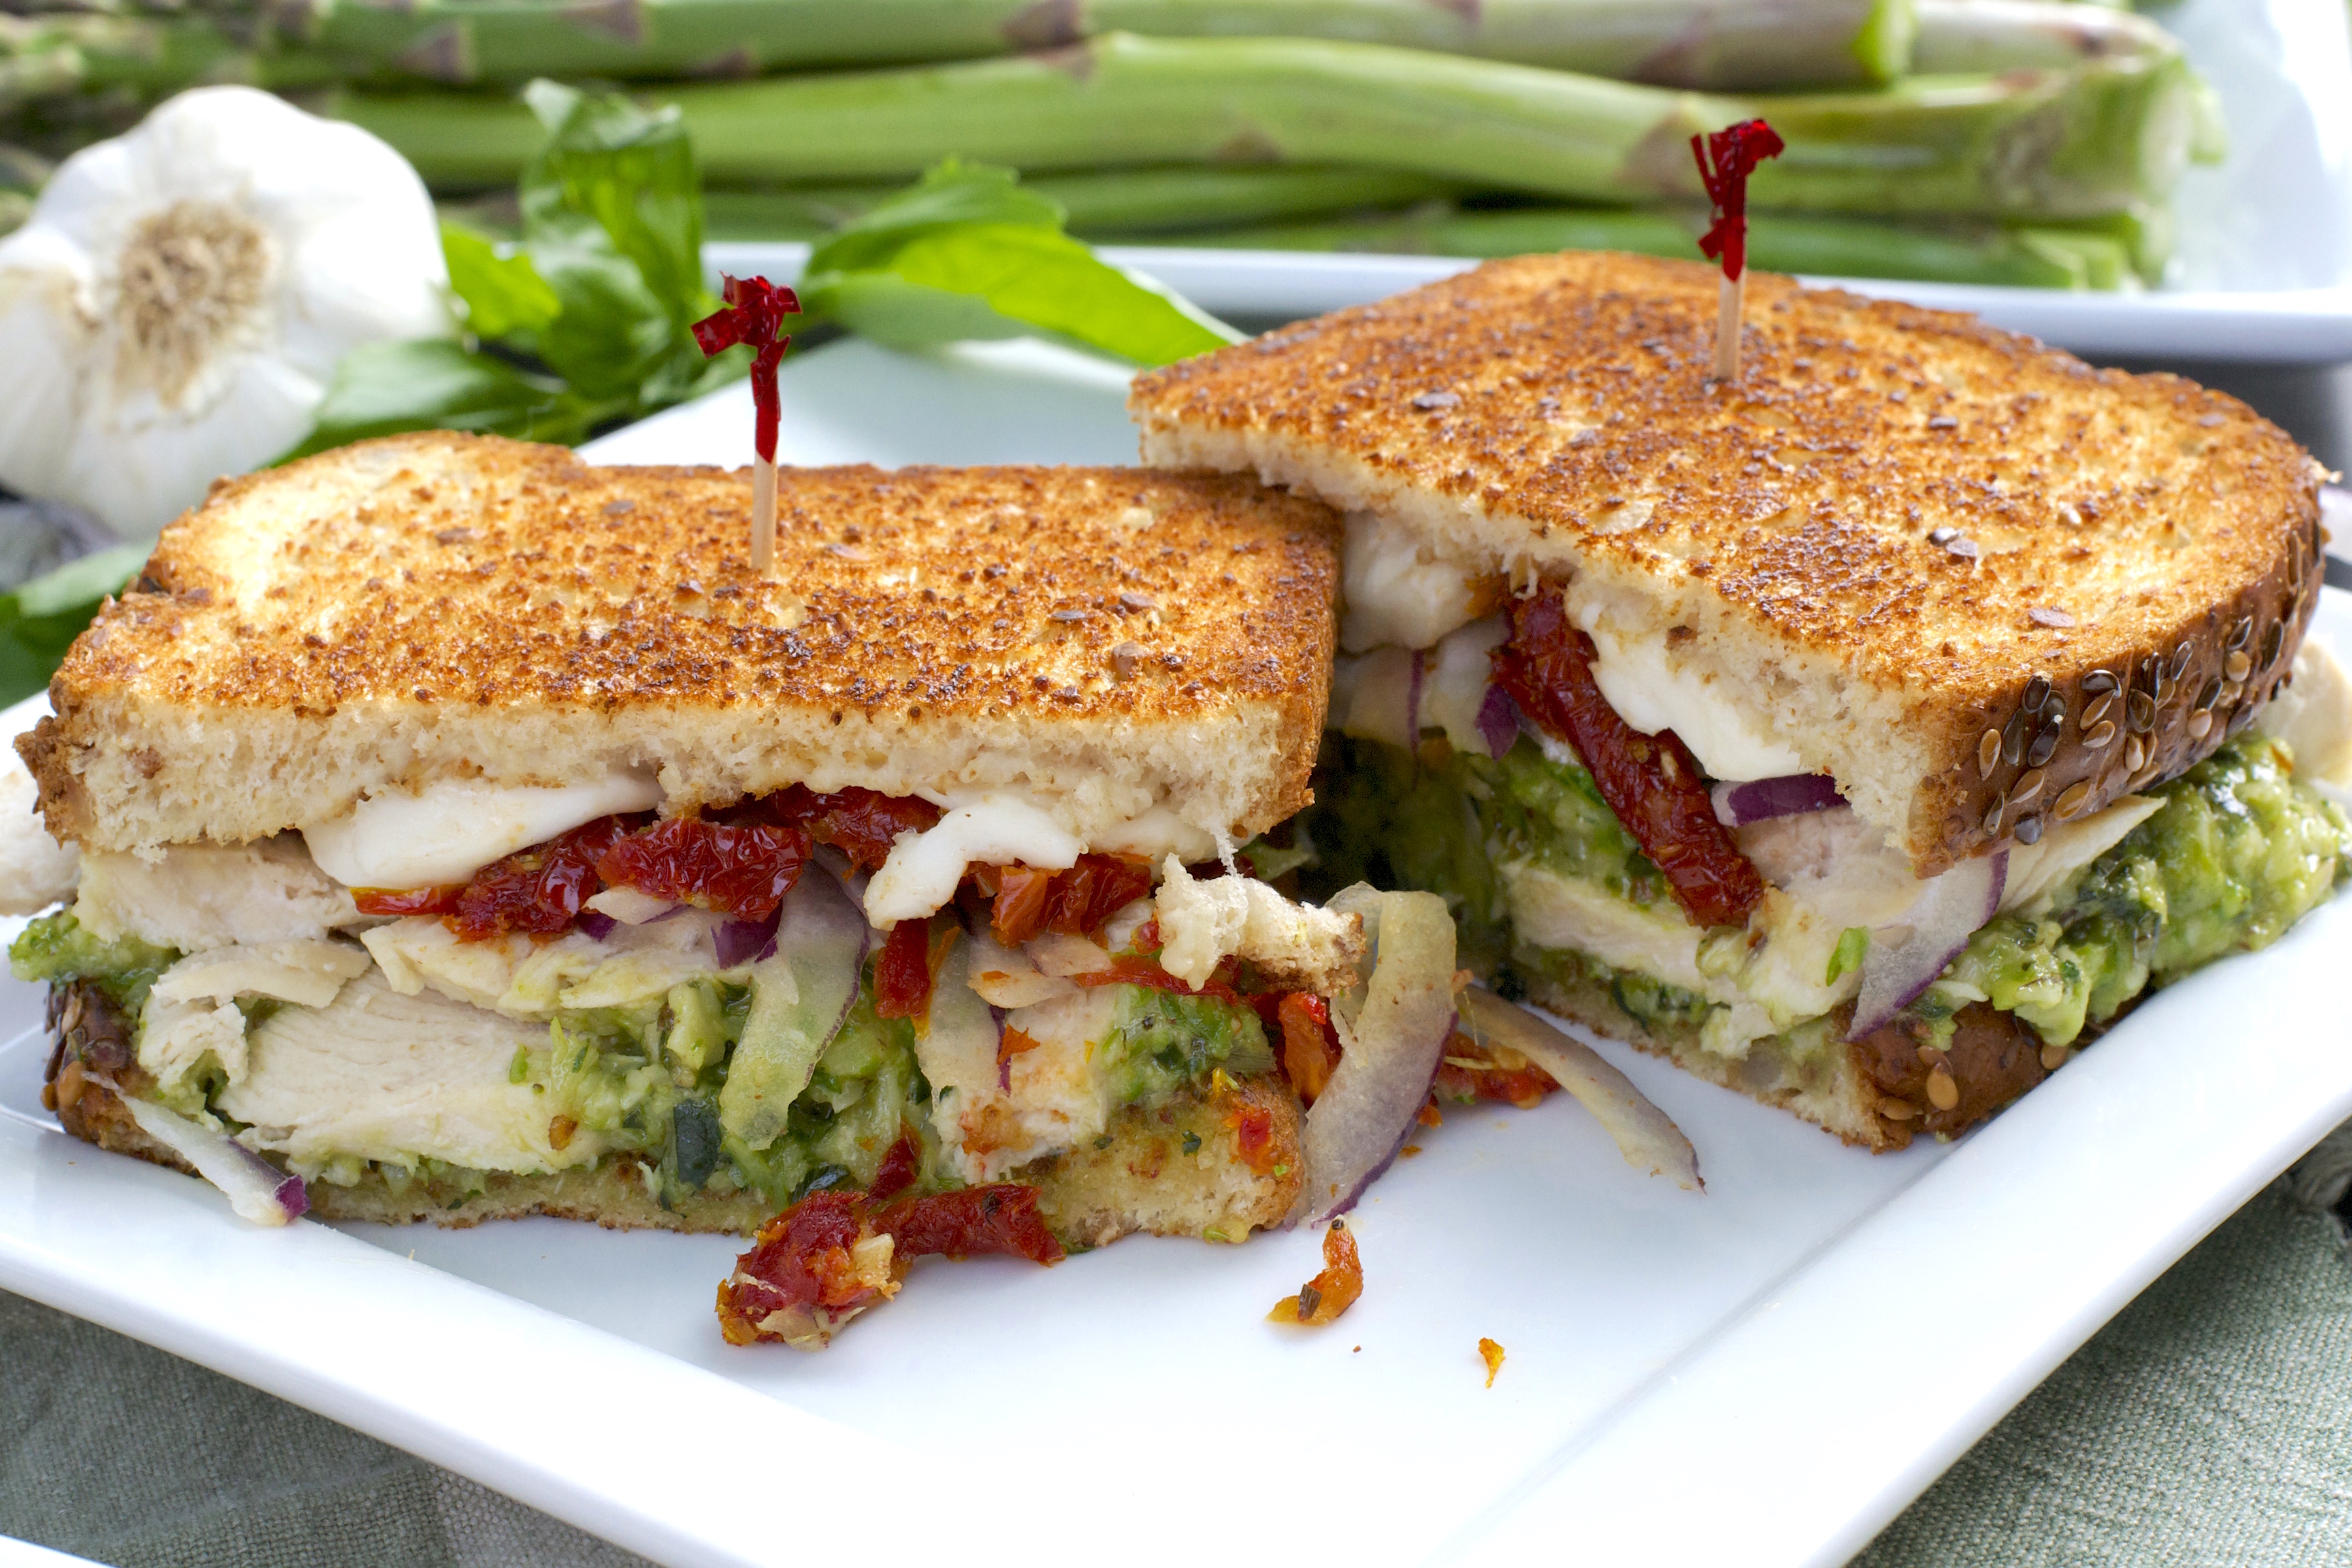 Asparagus Pesto Chicken Sandwich What The Forks For Dinner,Bloody Mary Mix